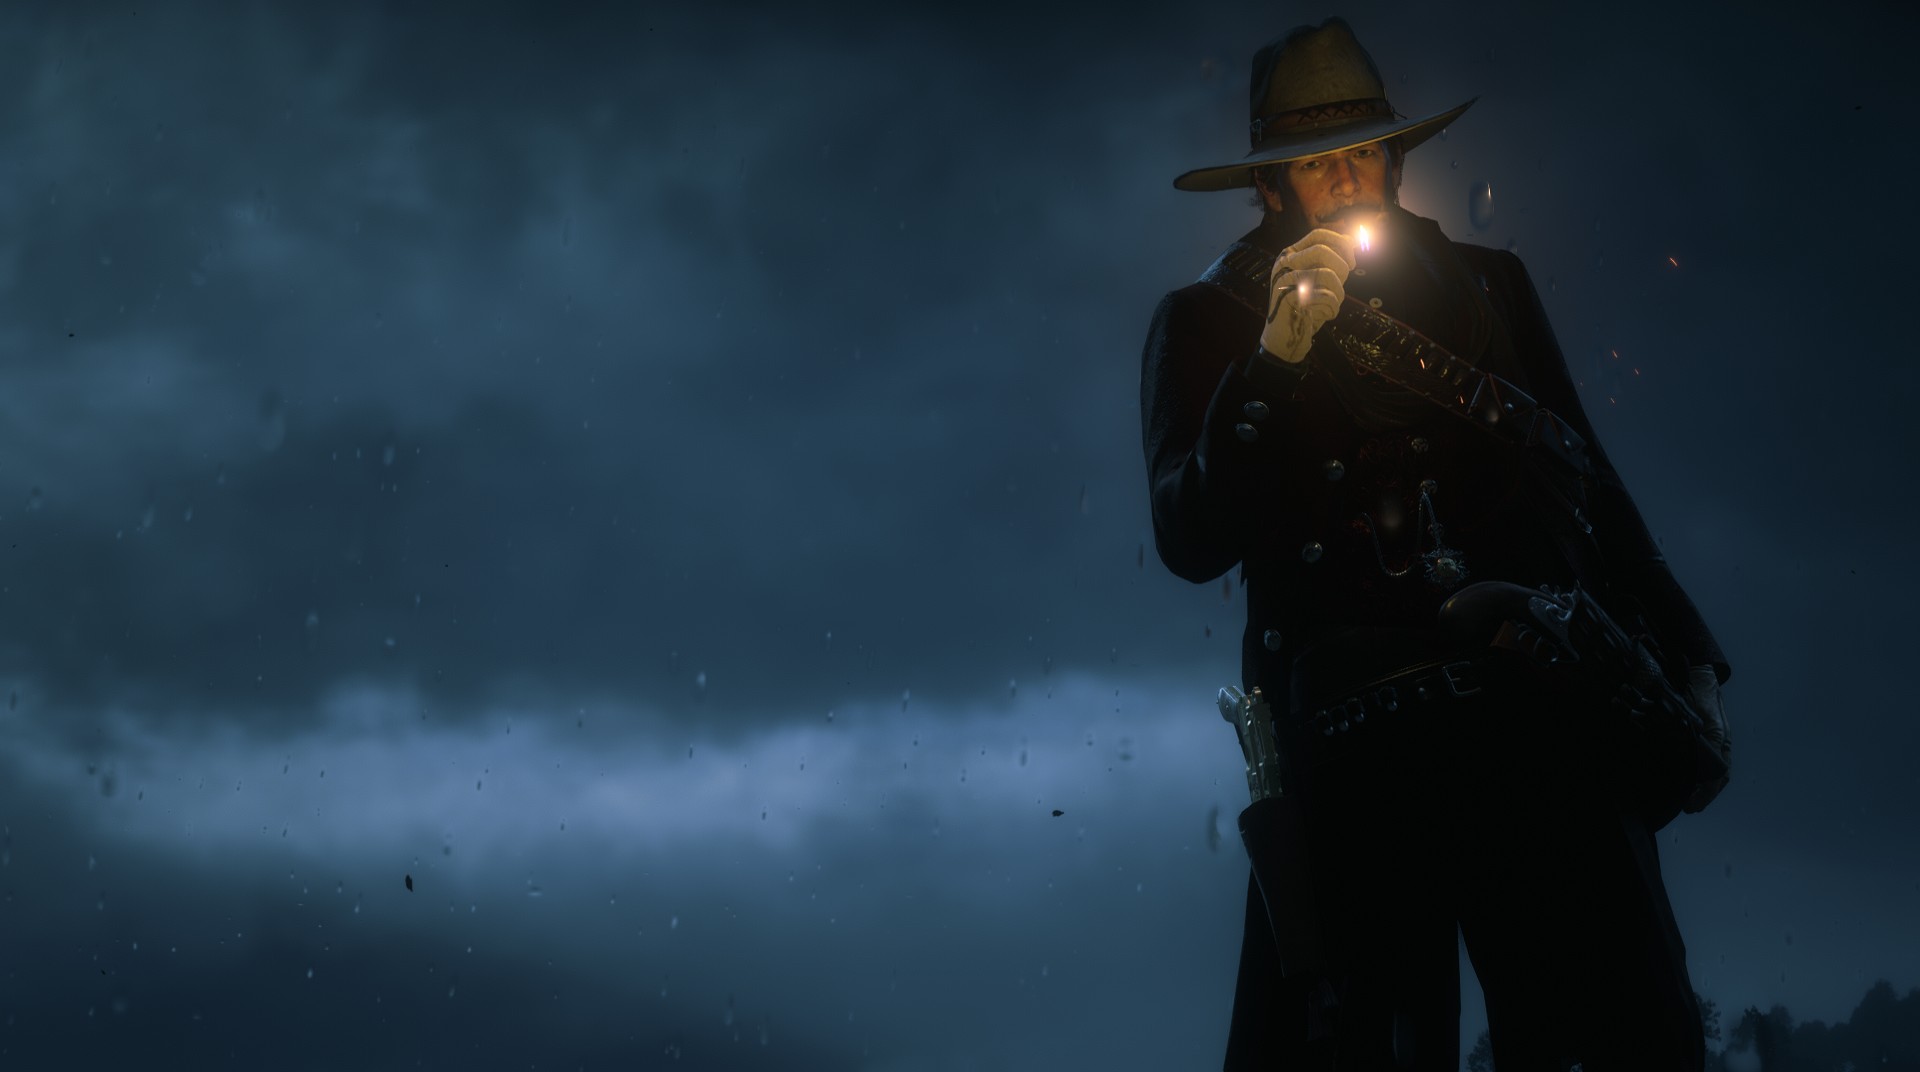 General 1920x1072 Red Dead Redemption 2 video game characters CGI fictional character sky PlayStation 4 standing video game art screen shot Rockstar Games night Arthur Morgan matches boys with guns gun video games moustache gloves men with hats hat pistol water water drops